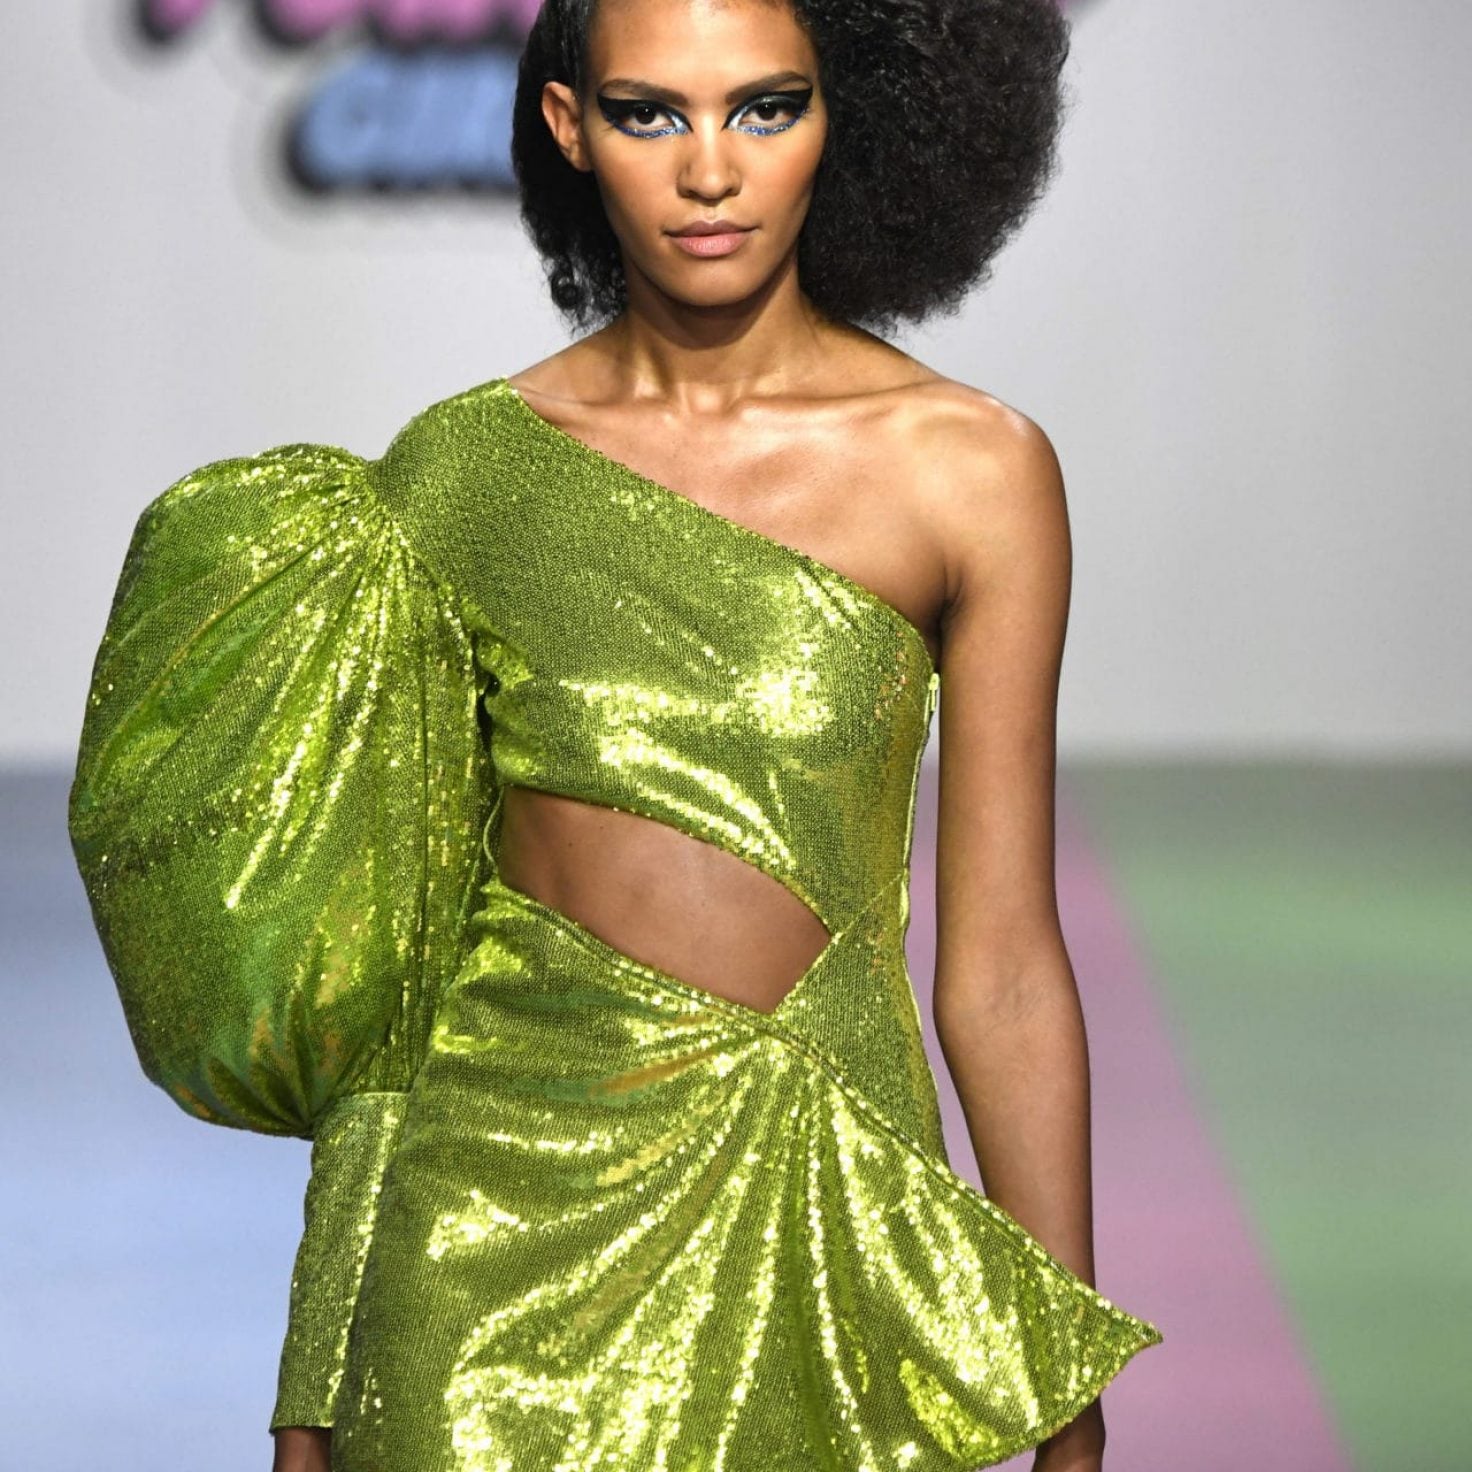 Fashion Turns To TV With Christian Cowan’s ‘Powerpuff Girls’ Collection